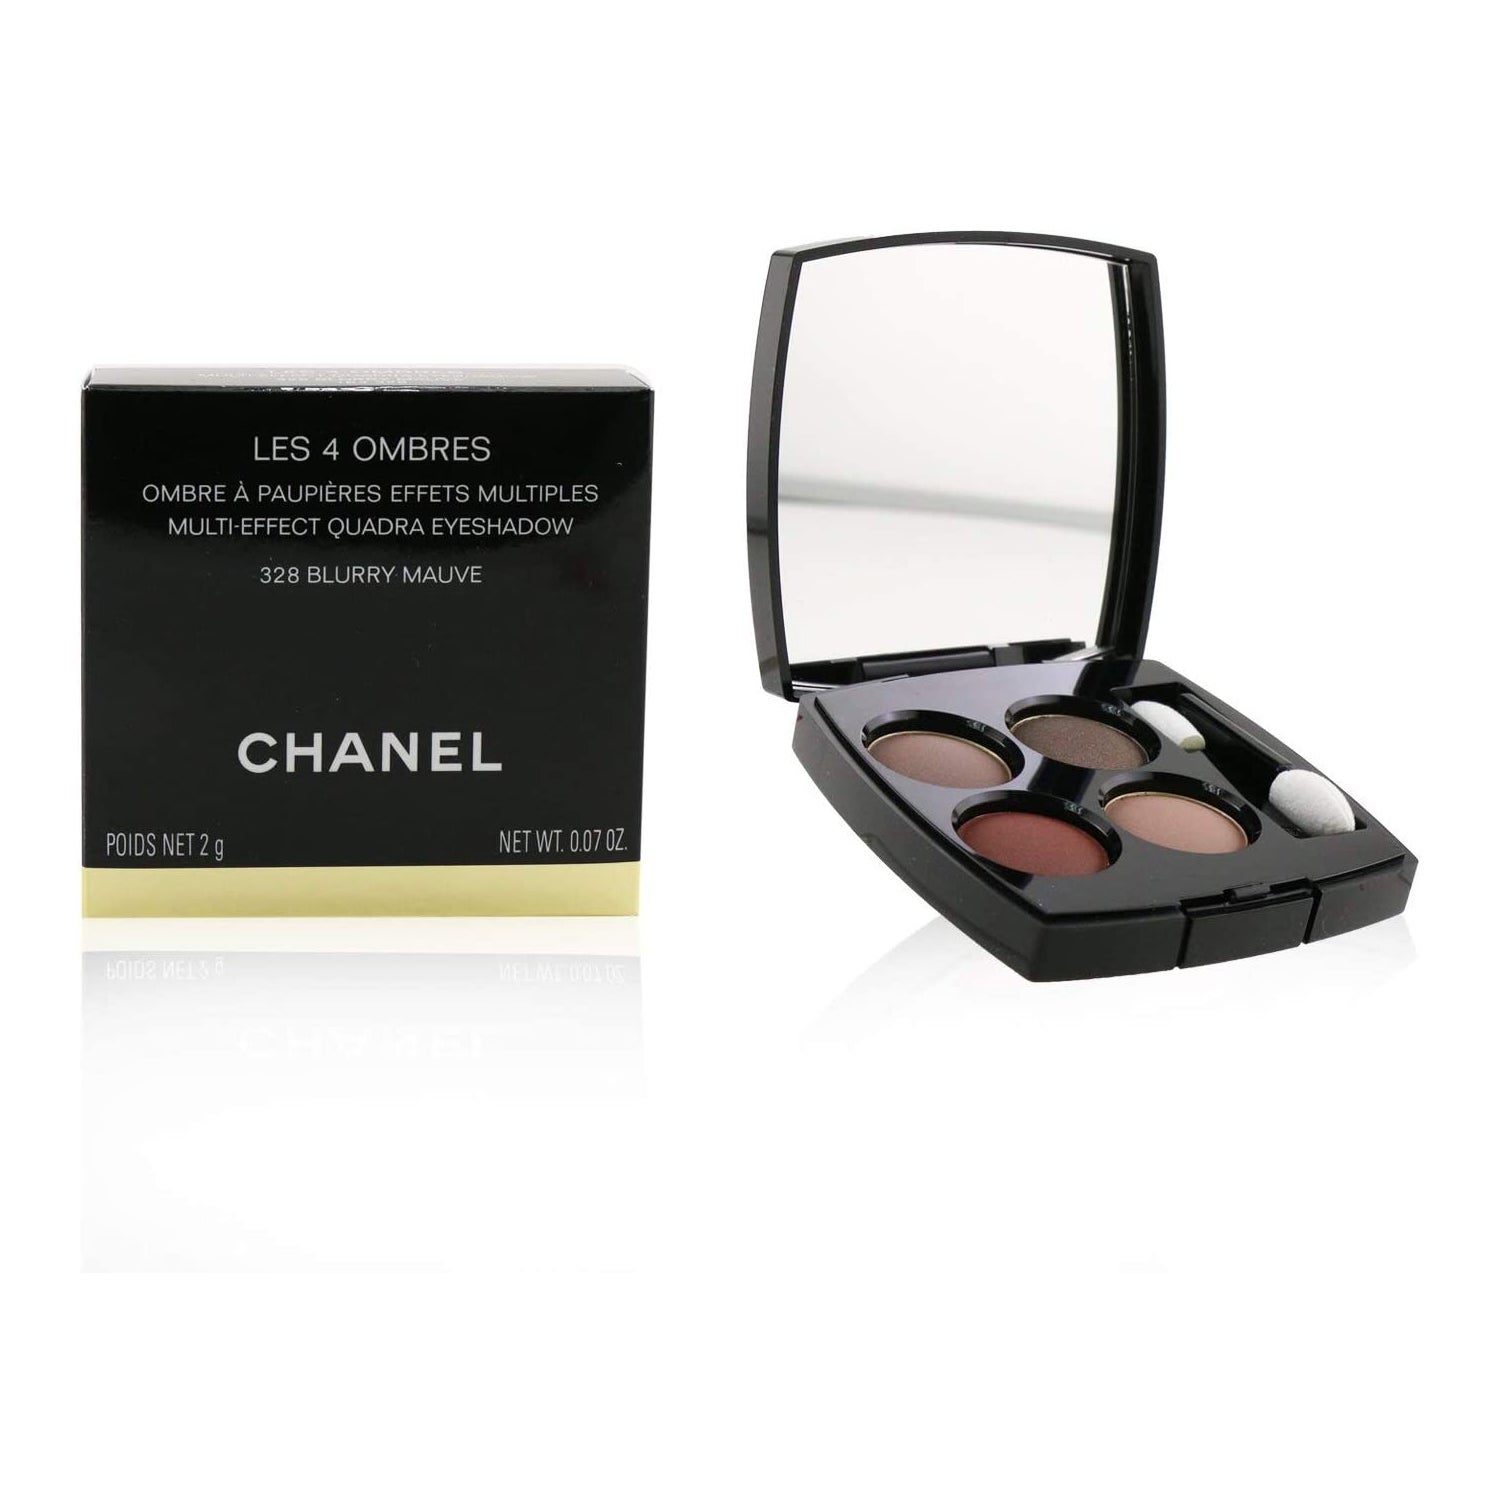 Chanel Elemental (352) Les 4 Ombres Eyeshadow Quad Review & Swatches